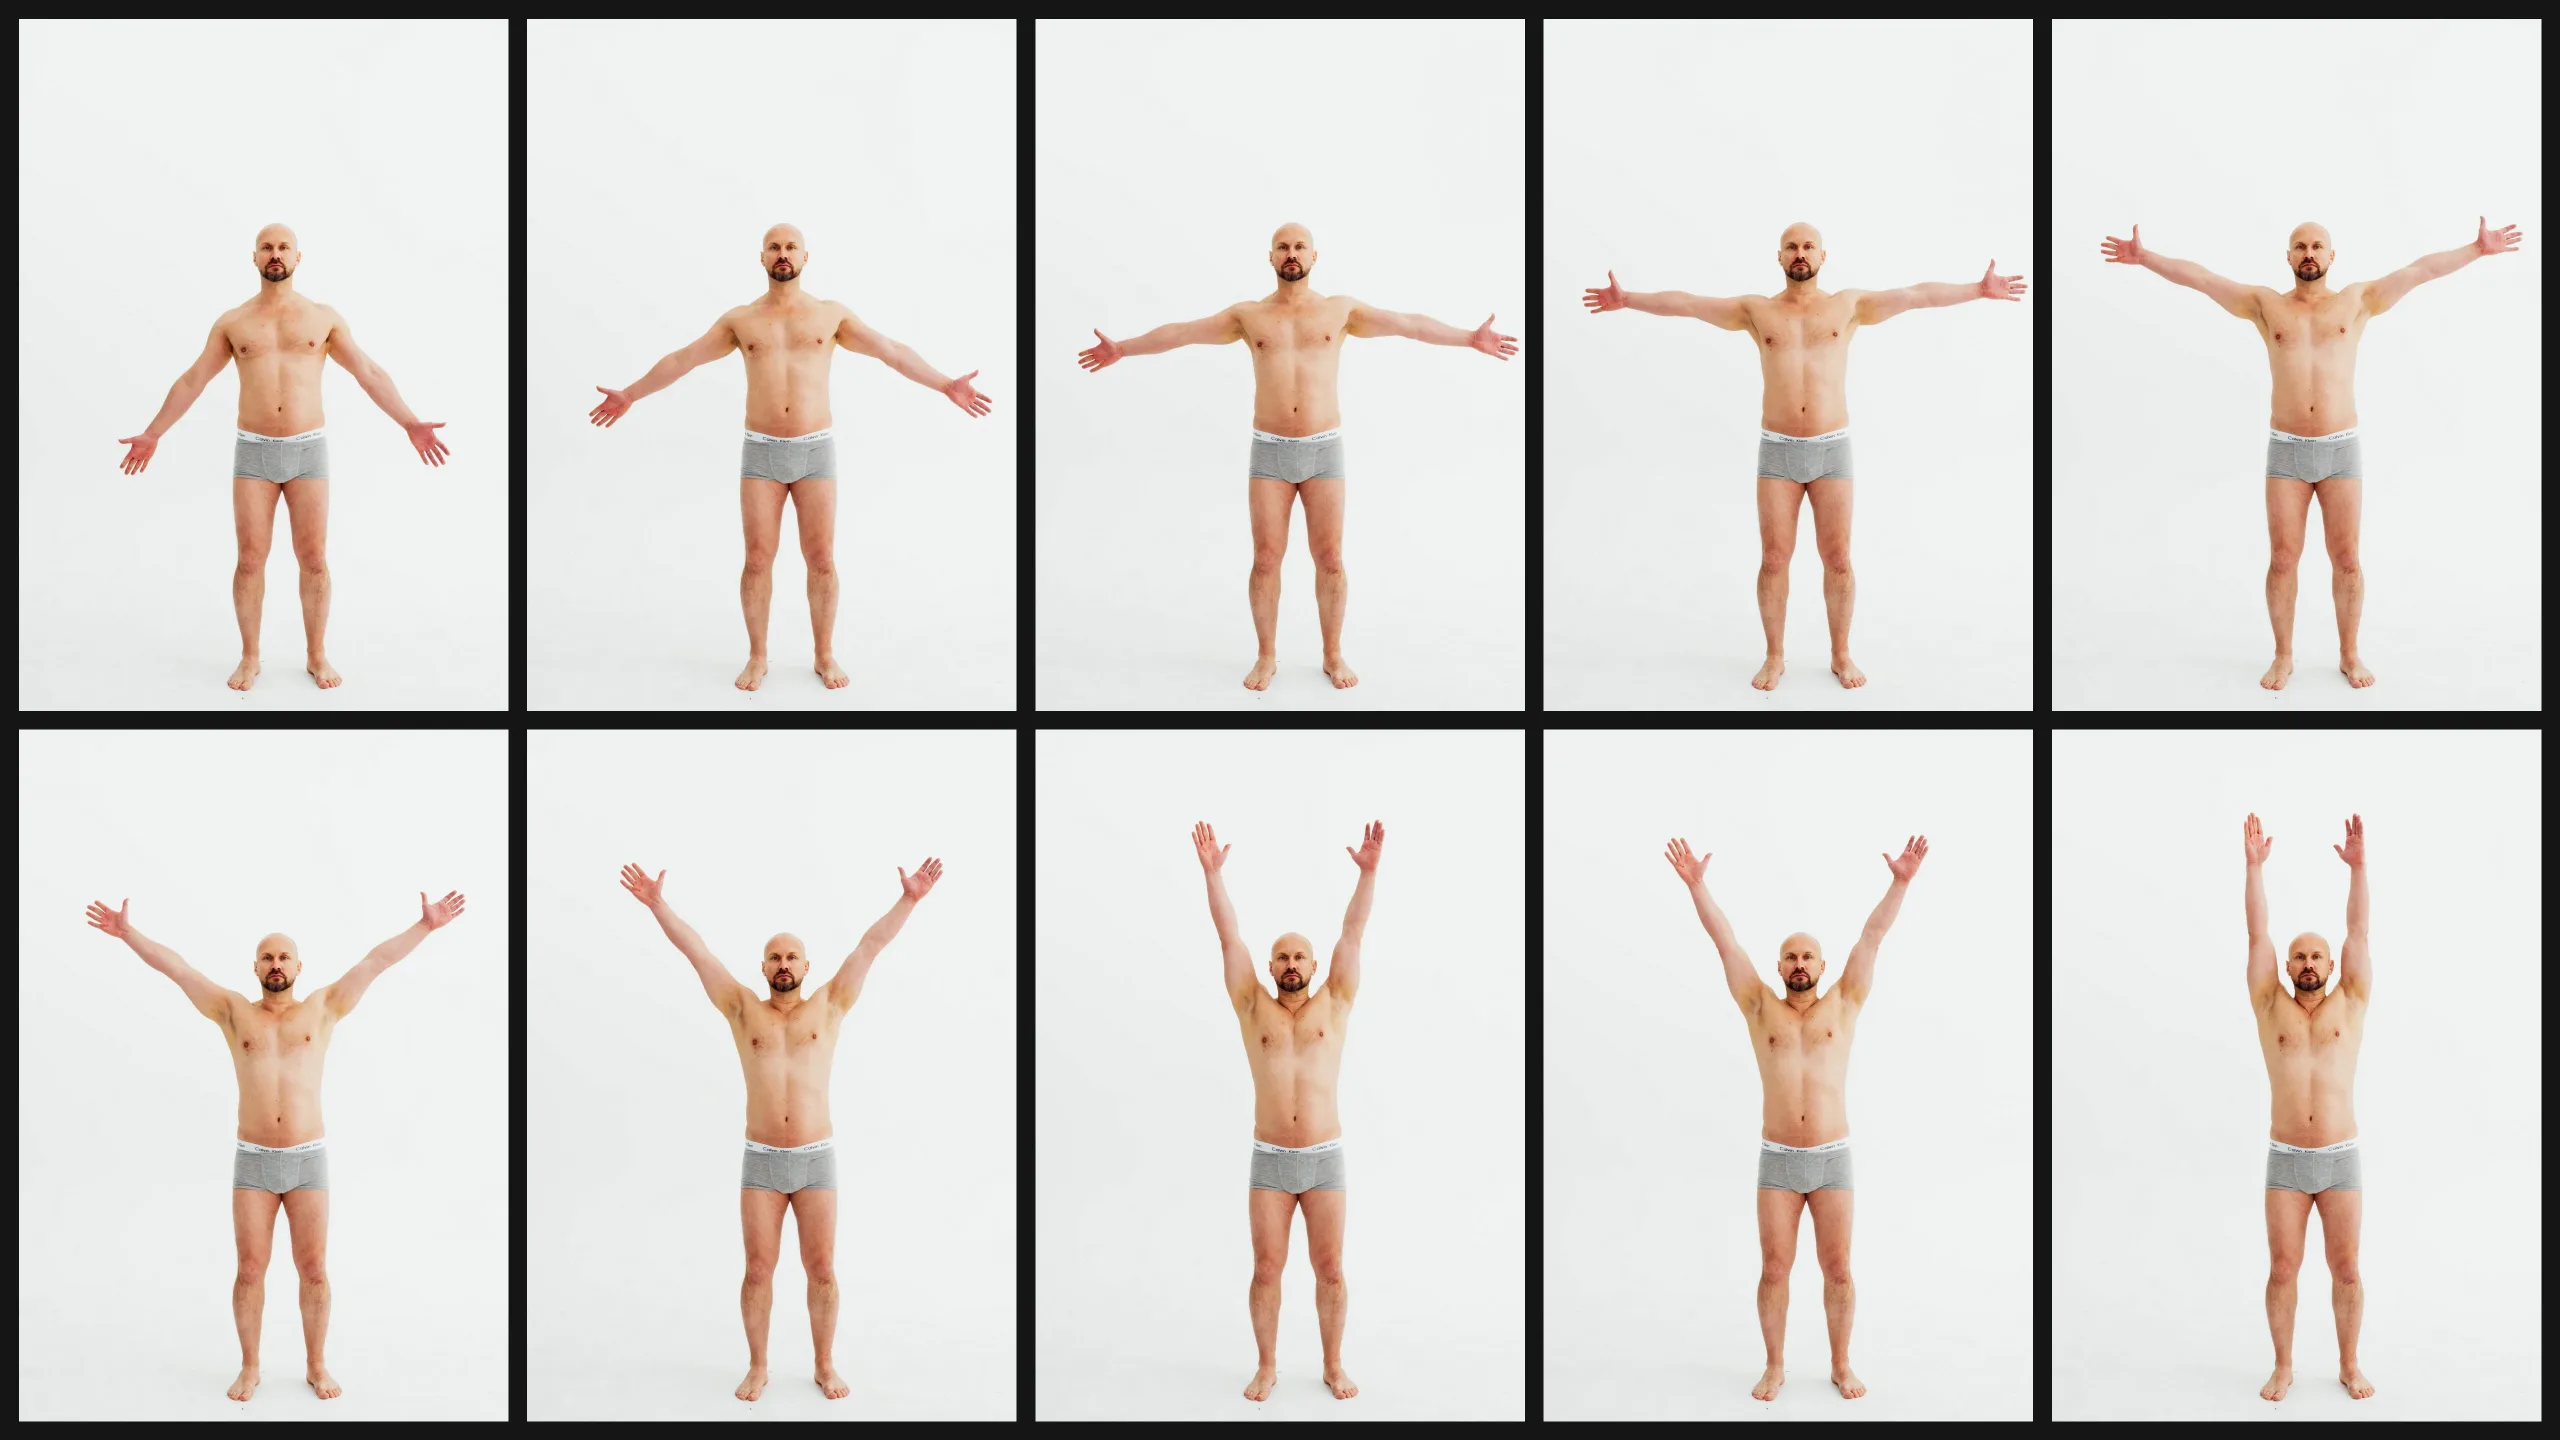 600+ Male Body in Motion - Reference Photos (Sequential Movement)